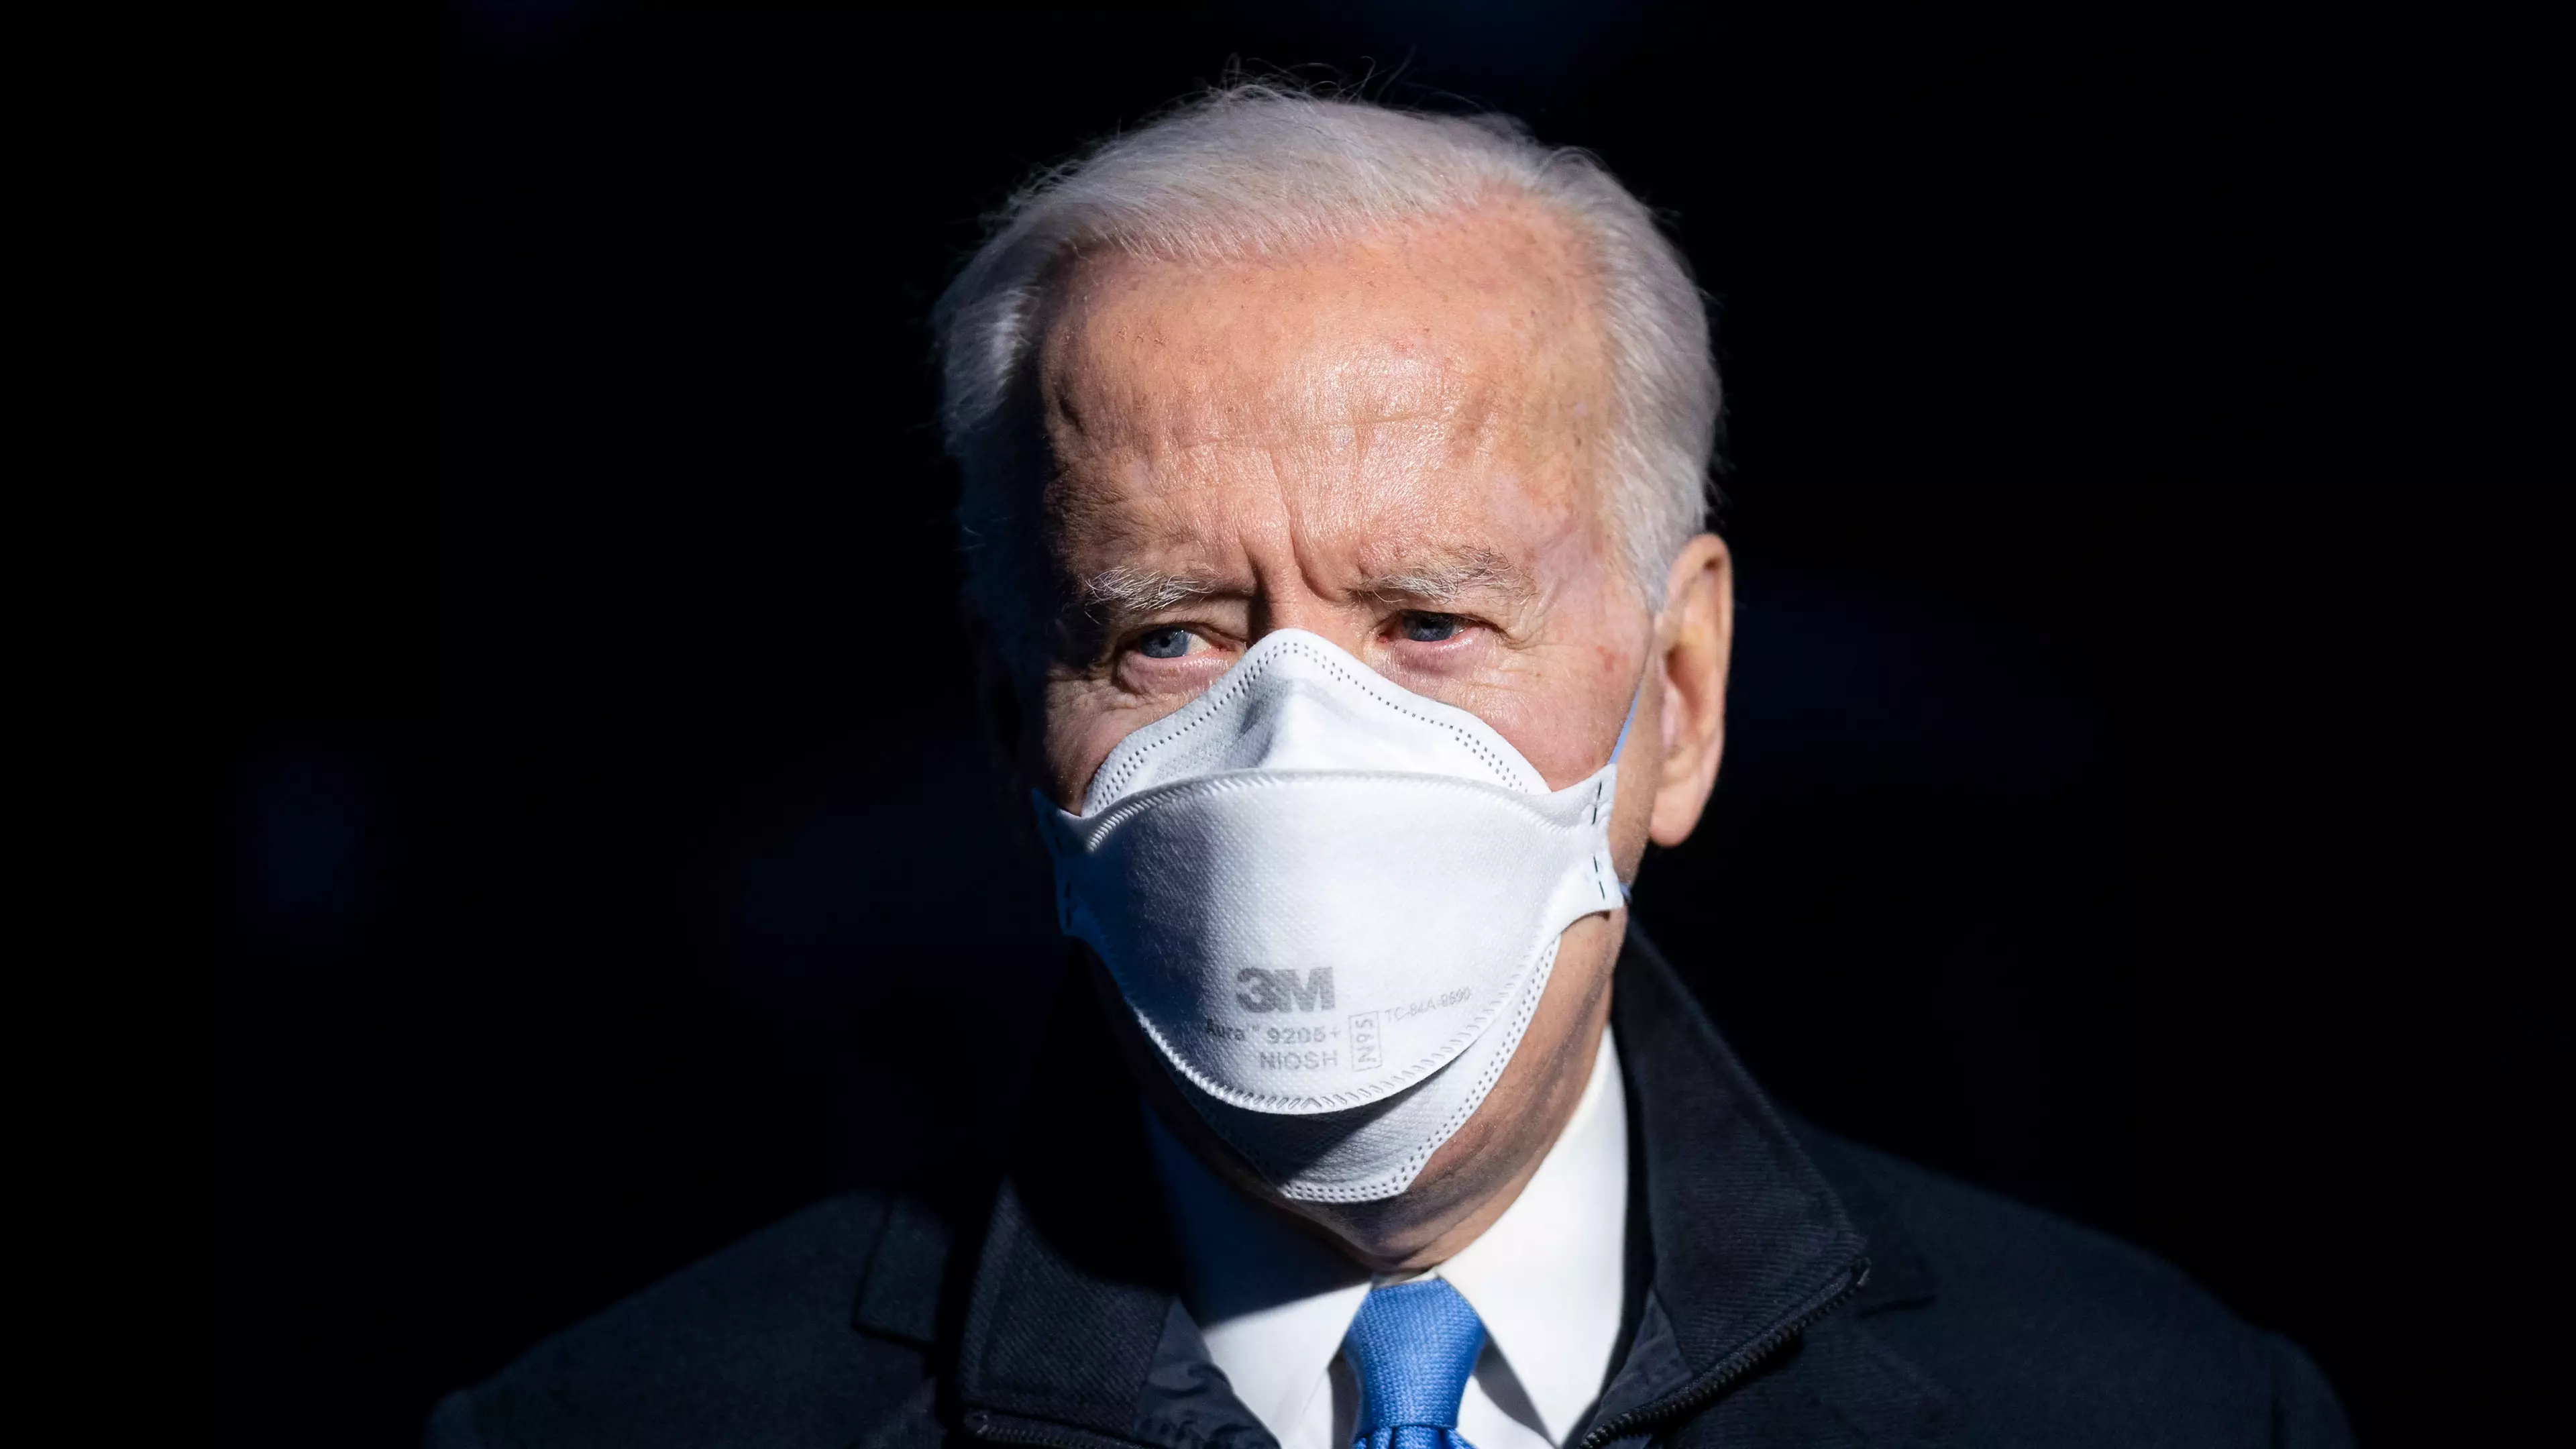 Armed Woman Approached White House Security With Letter For Joe Biden